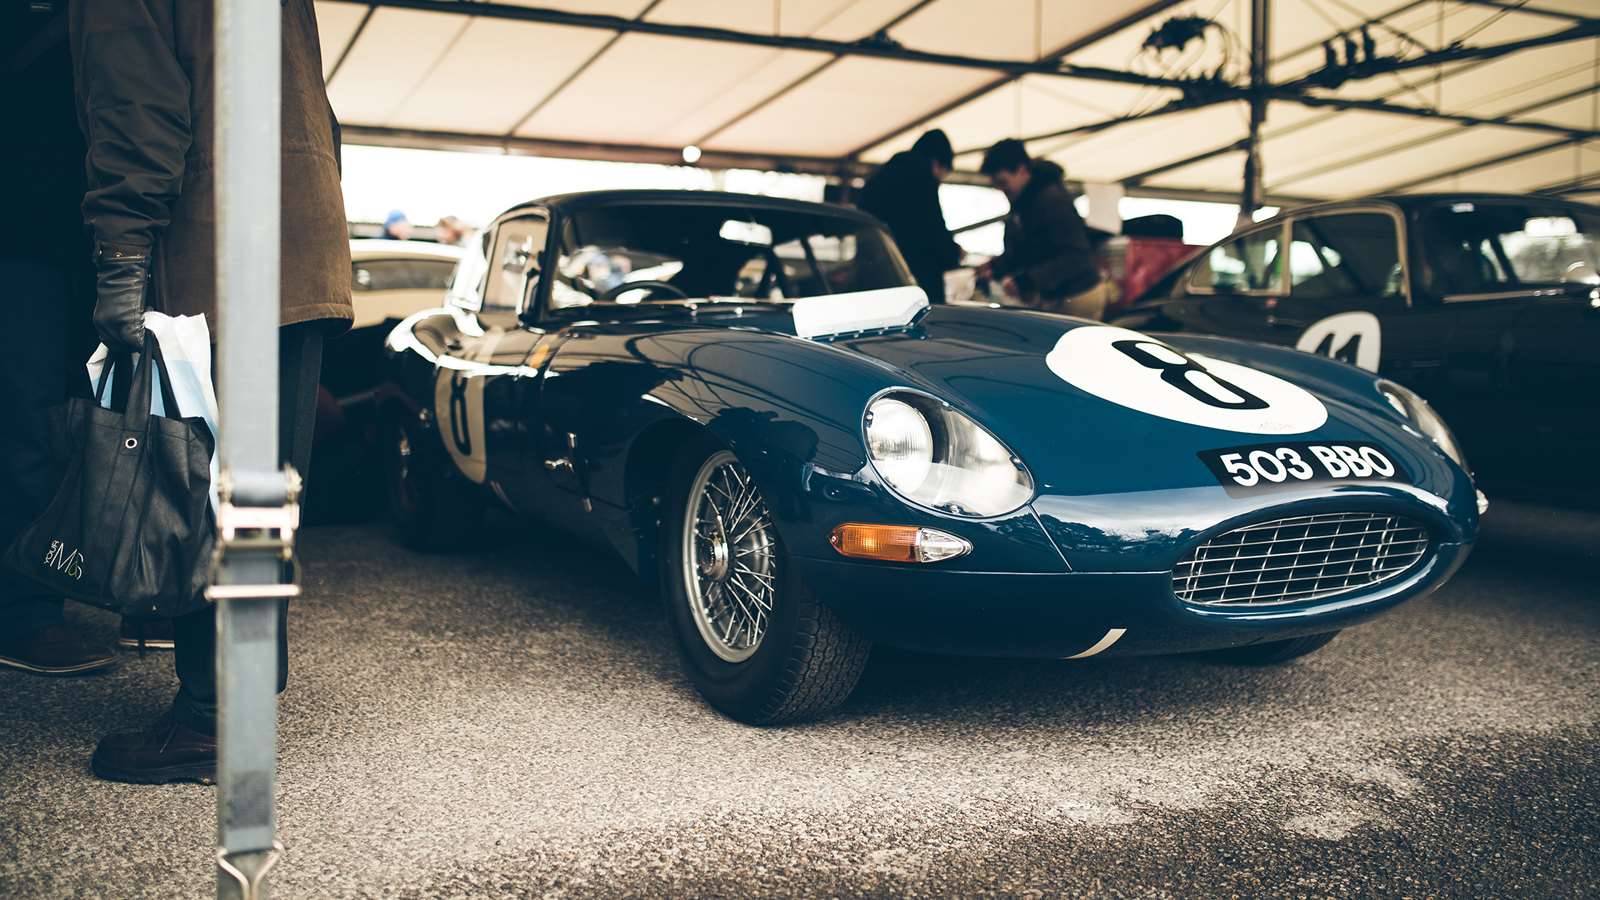 This E-type has the engine from a D-type and lay dormant for 58 years